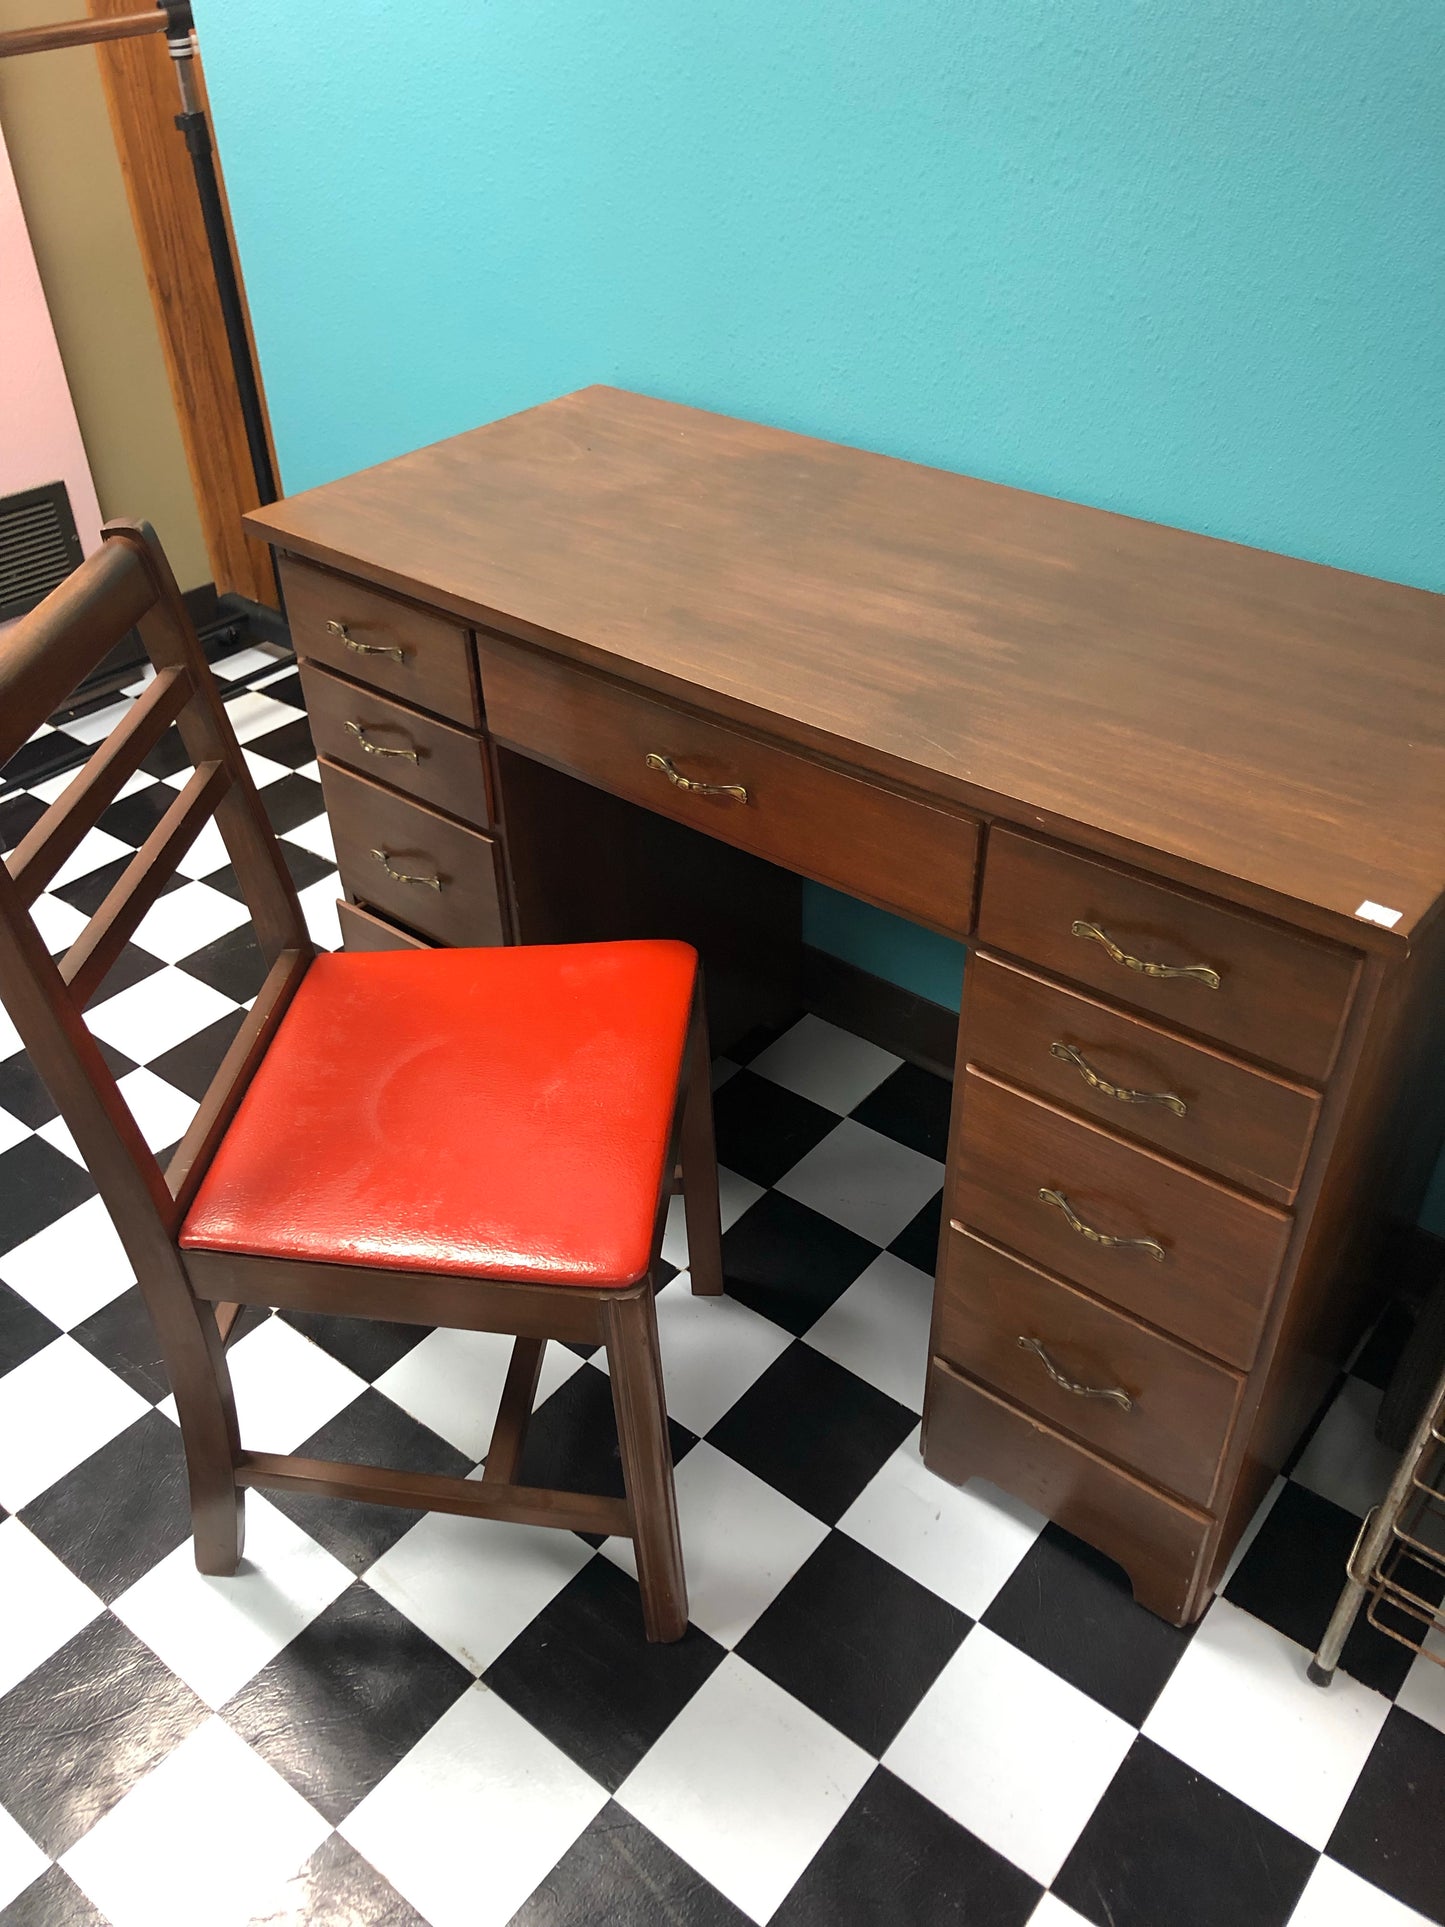 Wooden 8 drawer desk and chair with orange seat